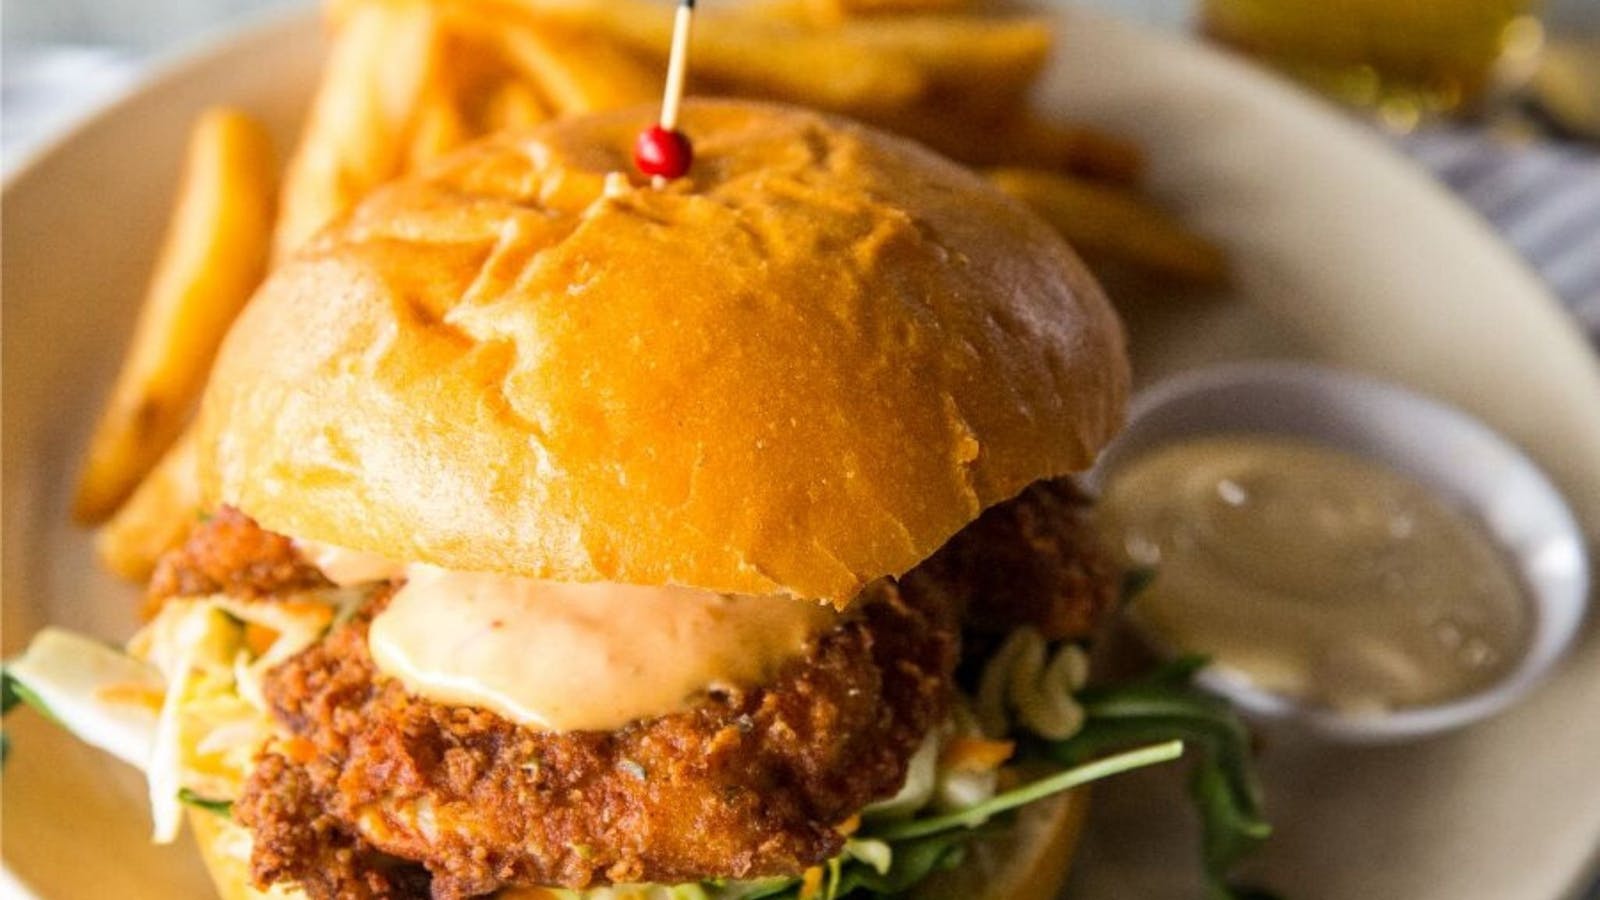 Southern fried chicken burger